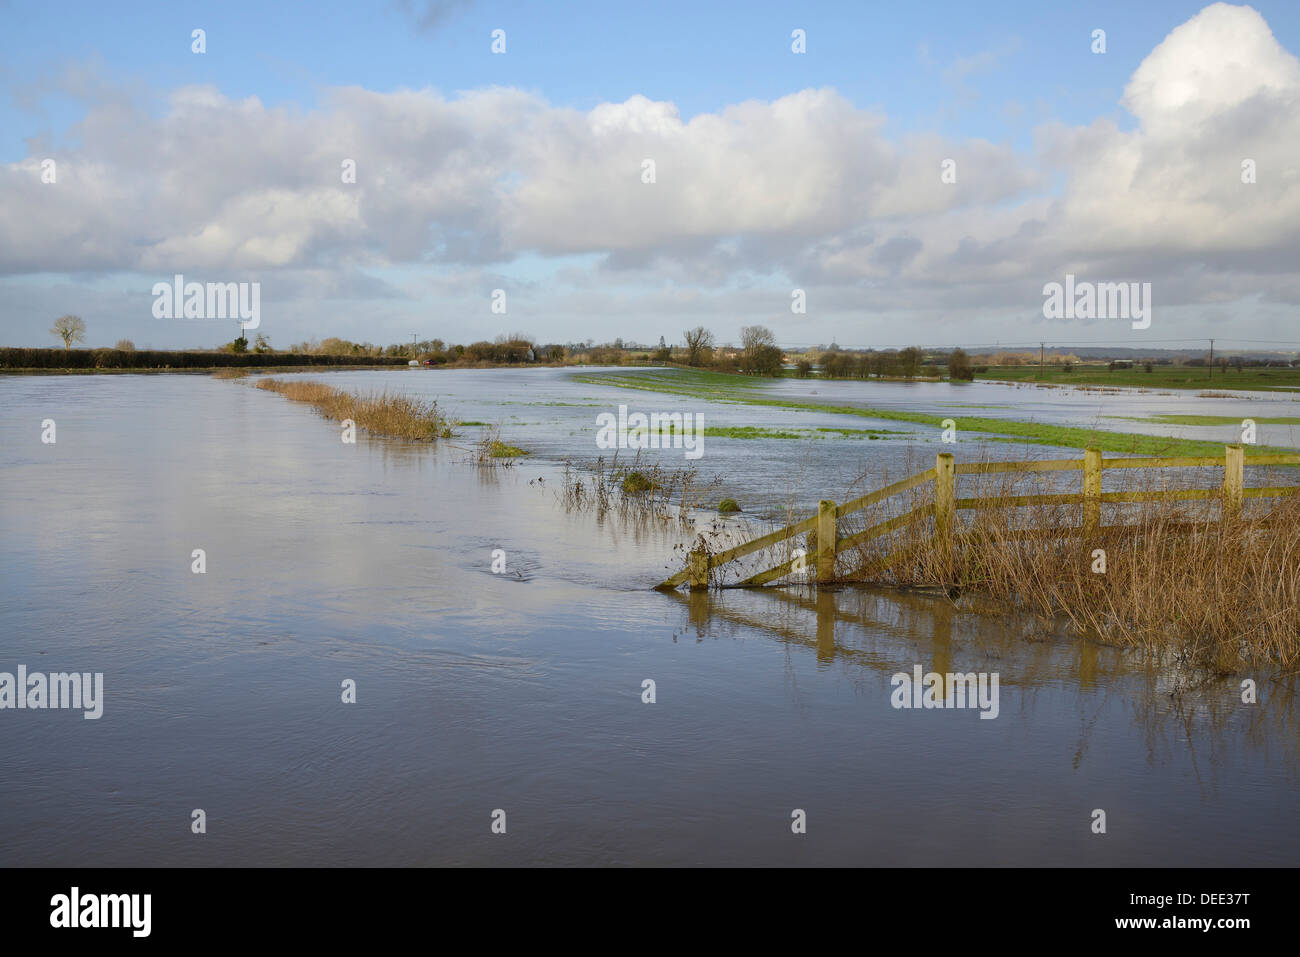 River Parrett overflowing onto Aller Moor near Staithe after weeks of heavy rain, Somerset Levels, Somerset, England, UK Stock Photo